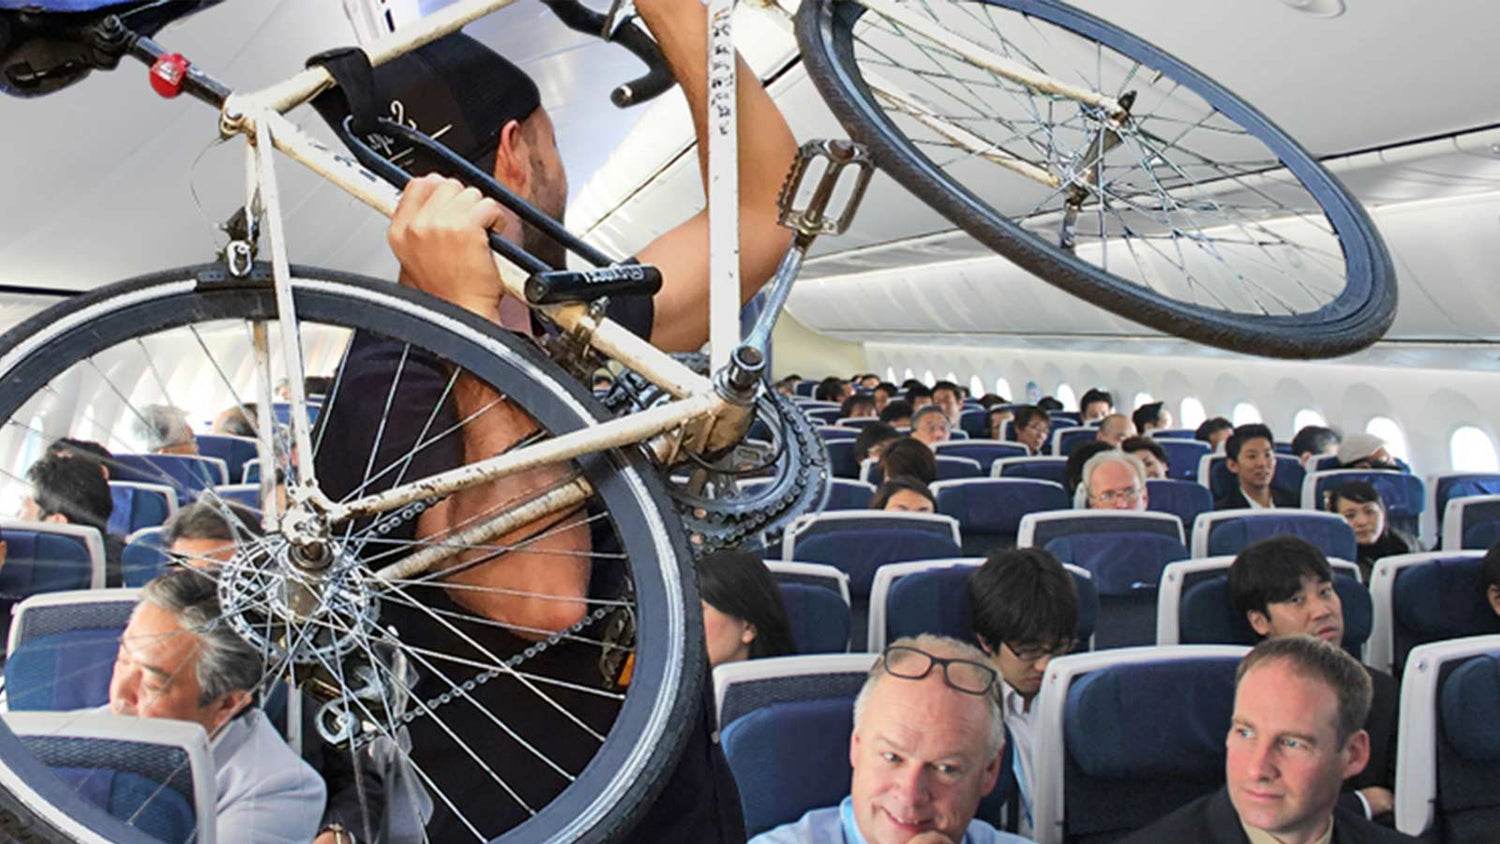 reliable airlines for cyclists travelling with a bicycle